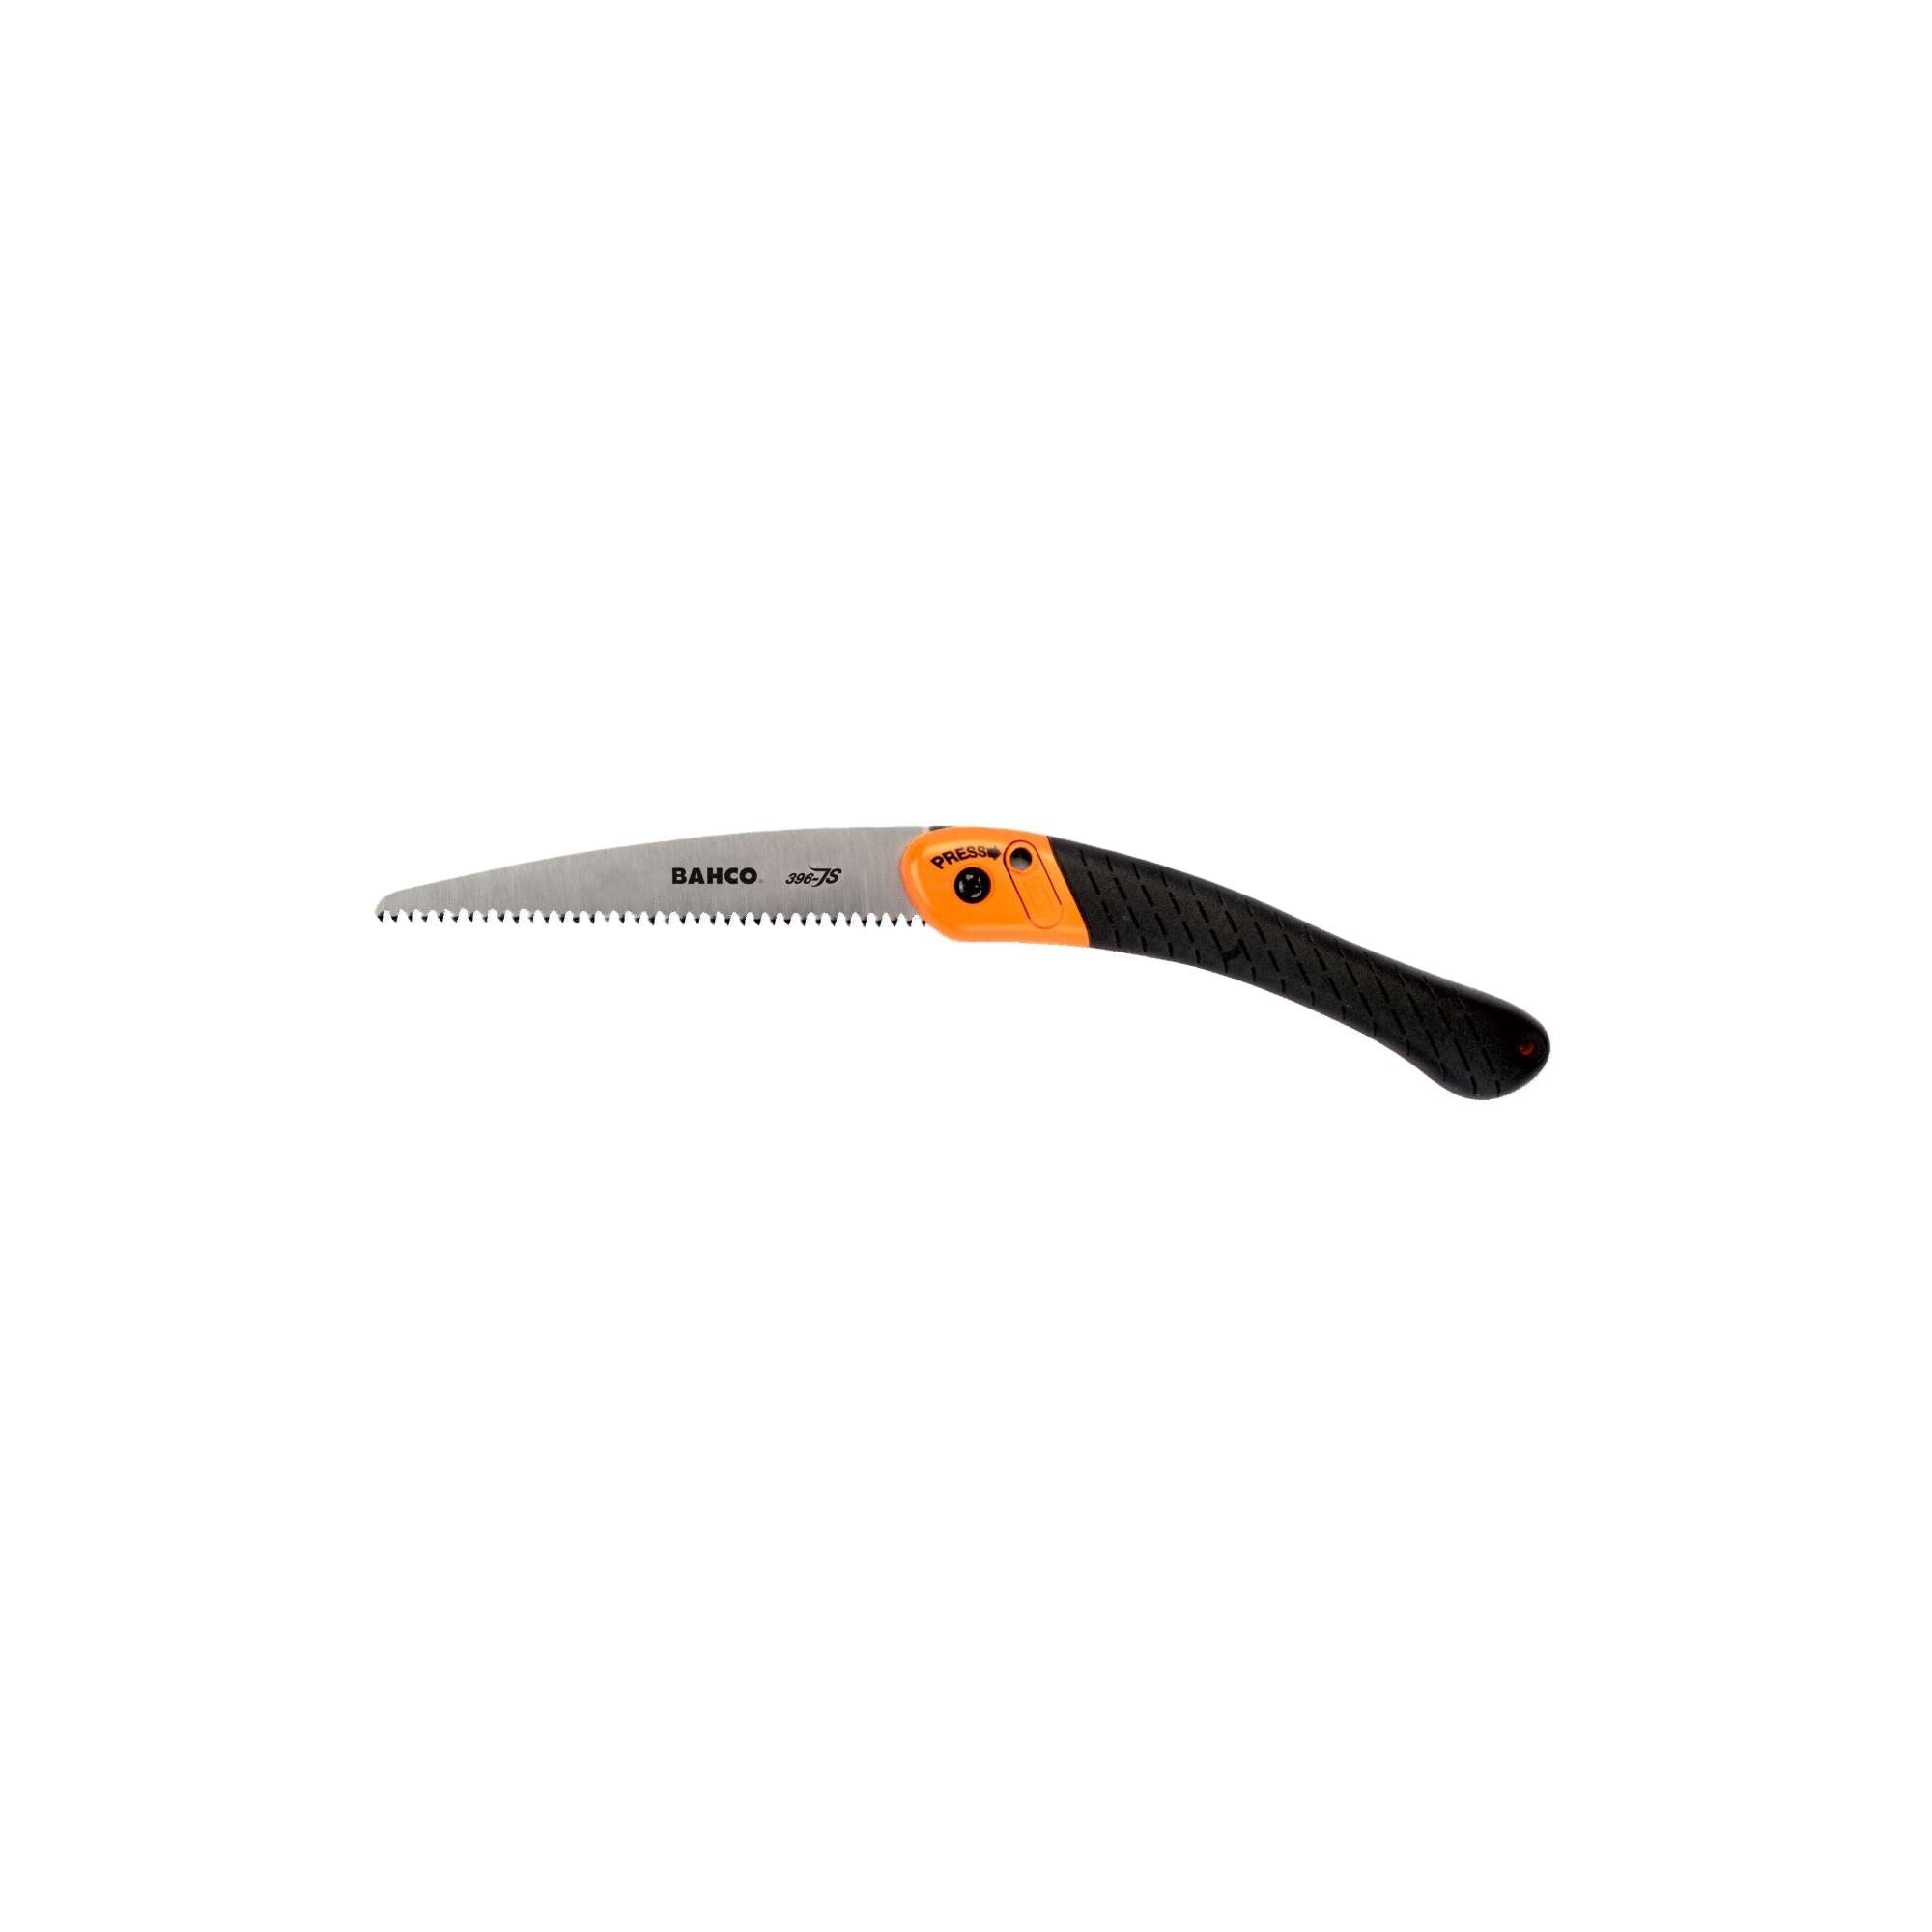 Serrated Saw for Cutting Green Wood - Bahco 396-JS